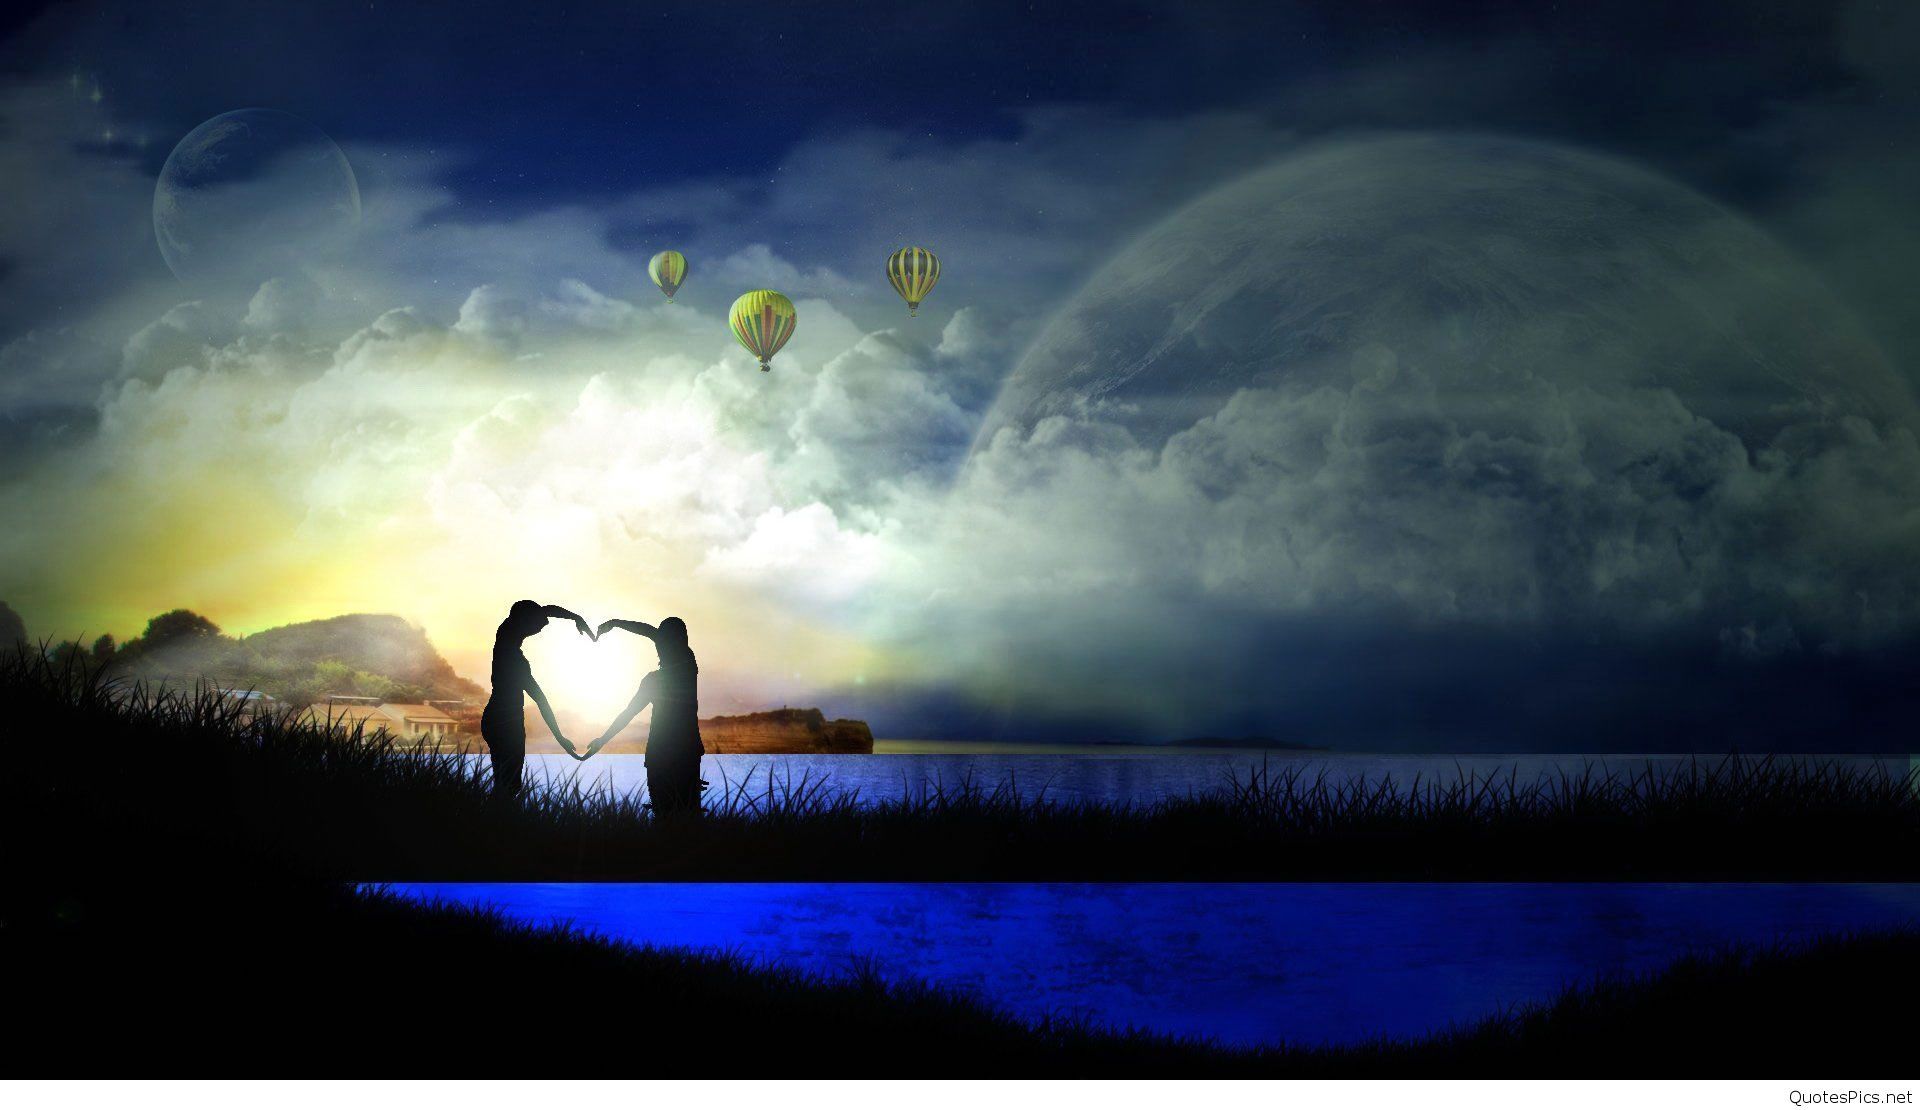 Fantasy Couple Love Animated Full Screen High Resolution Background HD Wallpaper